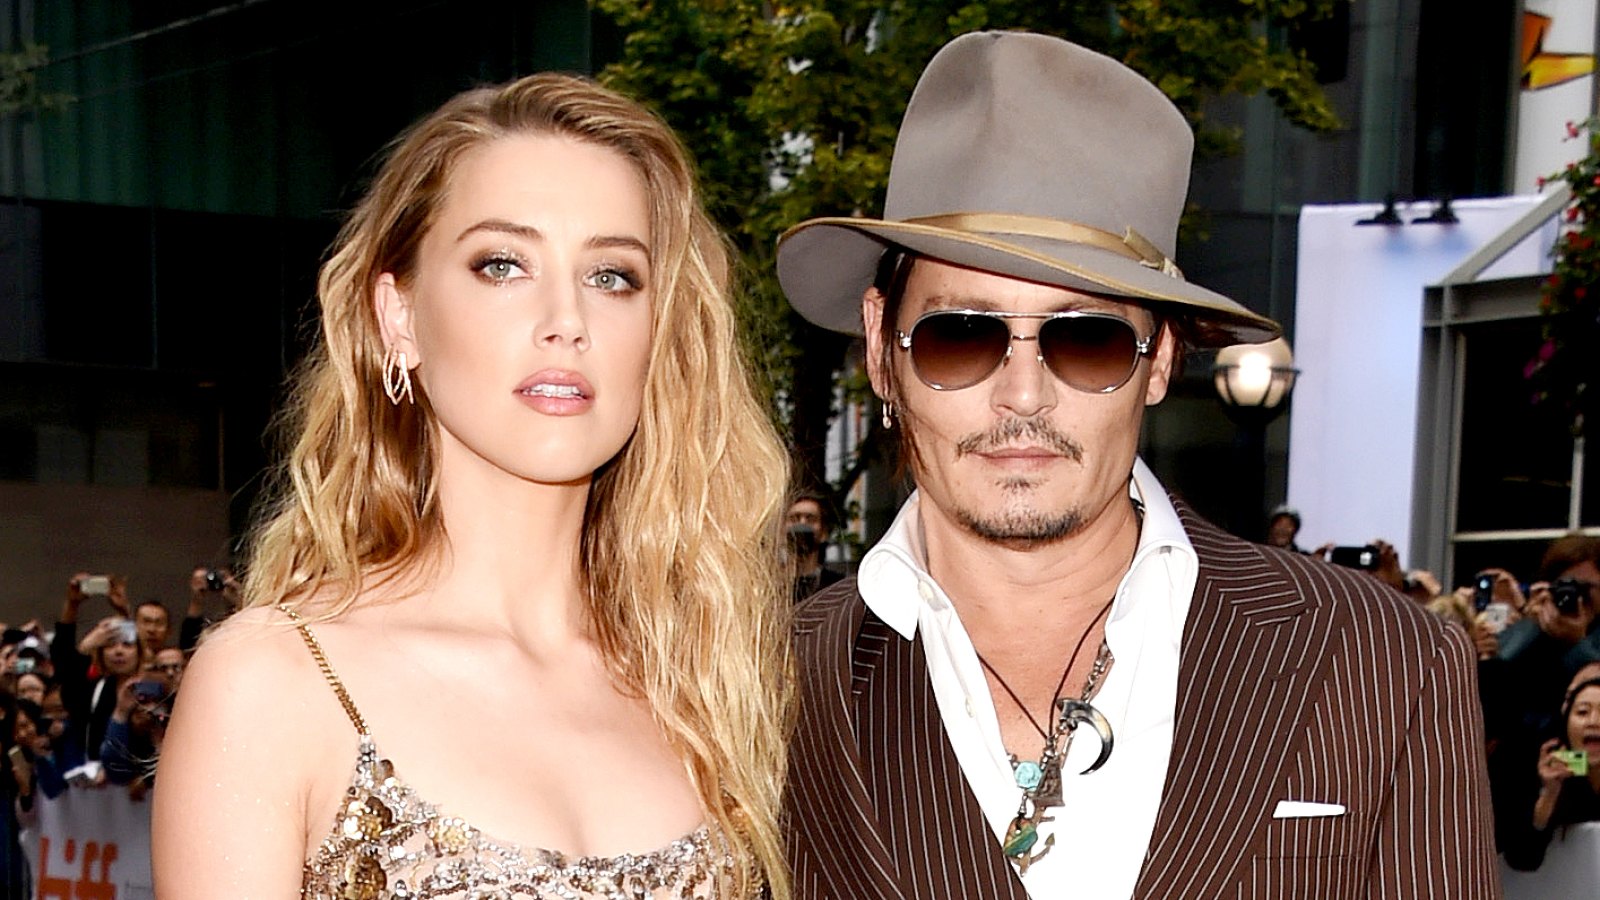 Amber Heard and Johnny Depp attend "The Danish Girl" premiere during the 2015 Toronto International Film Festival.